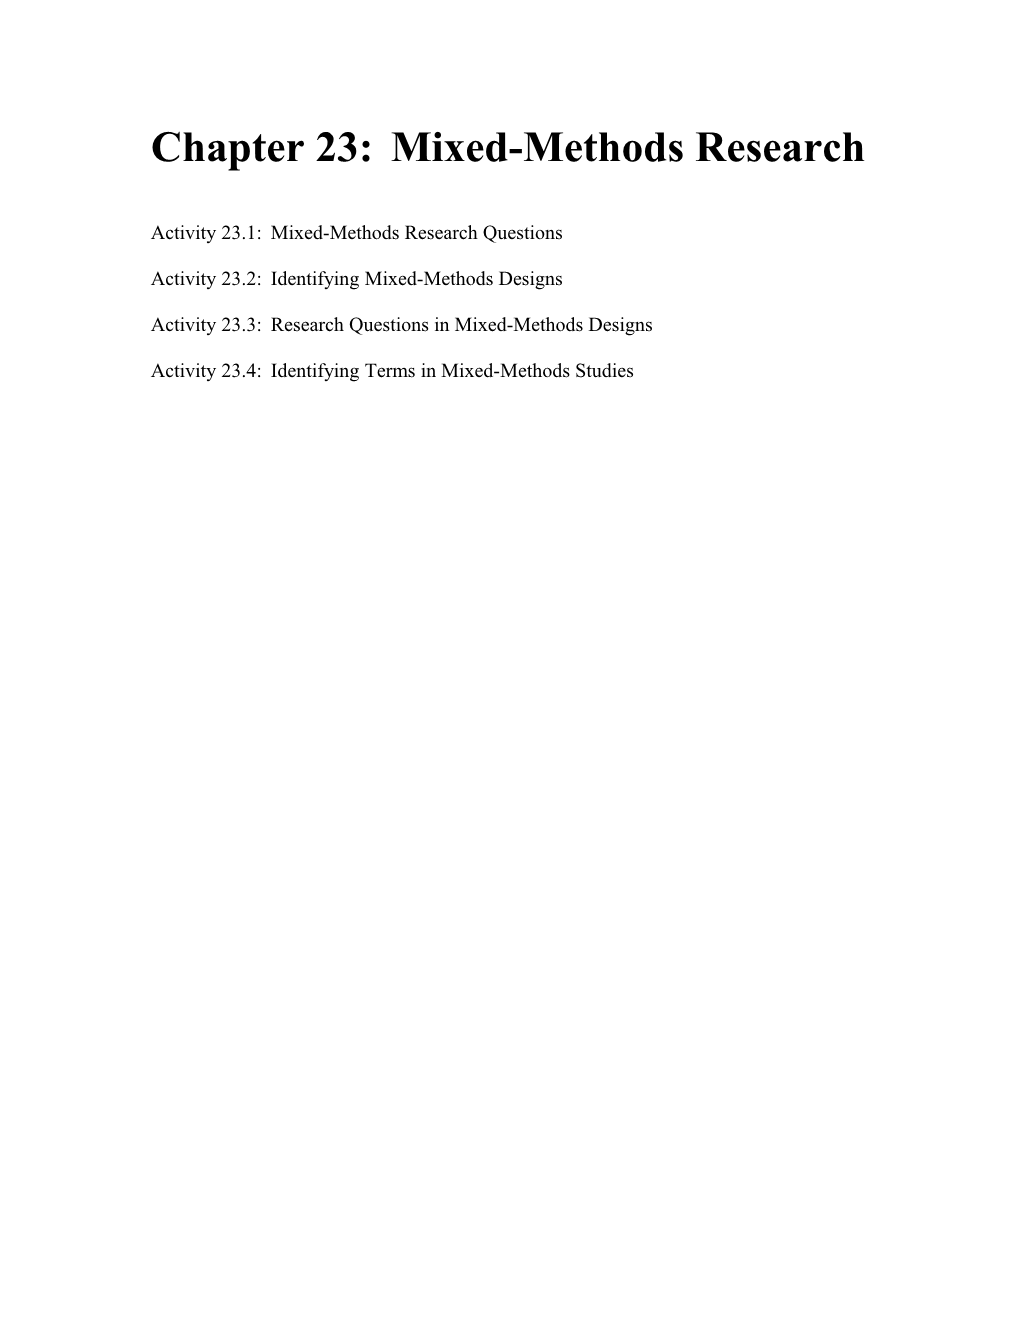 Chapter 23:Mixed-Methods Research